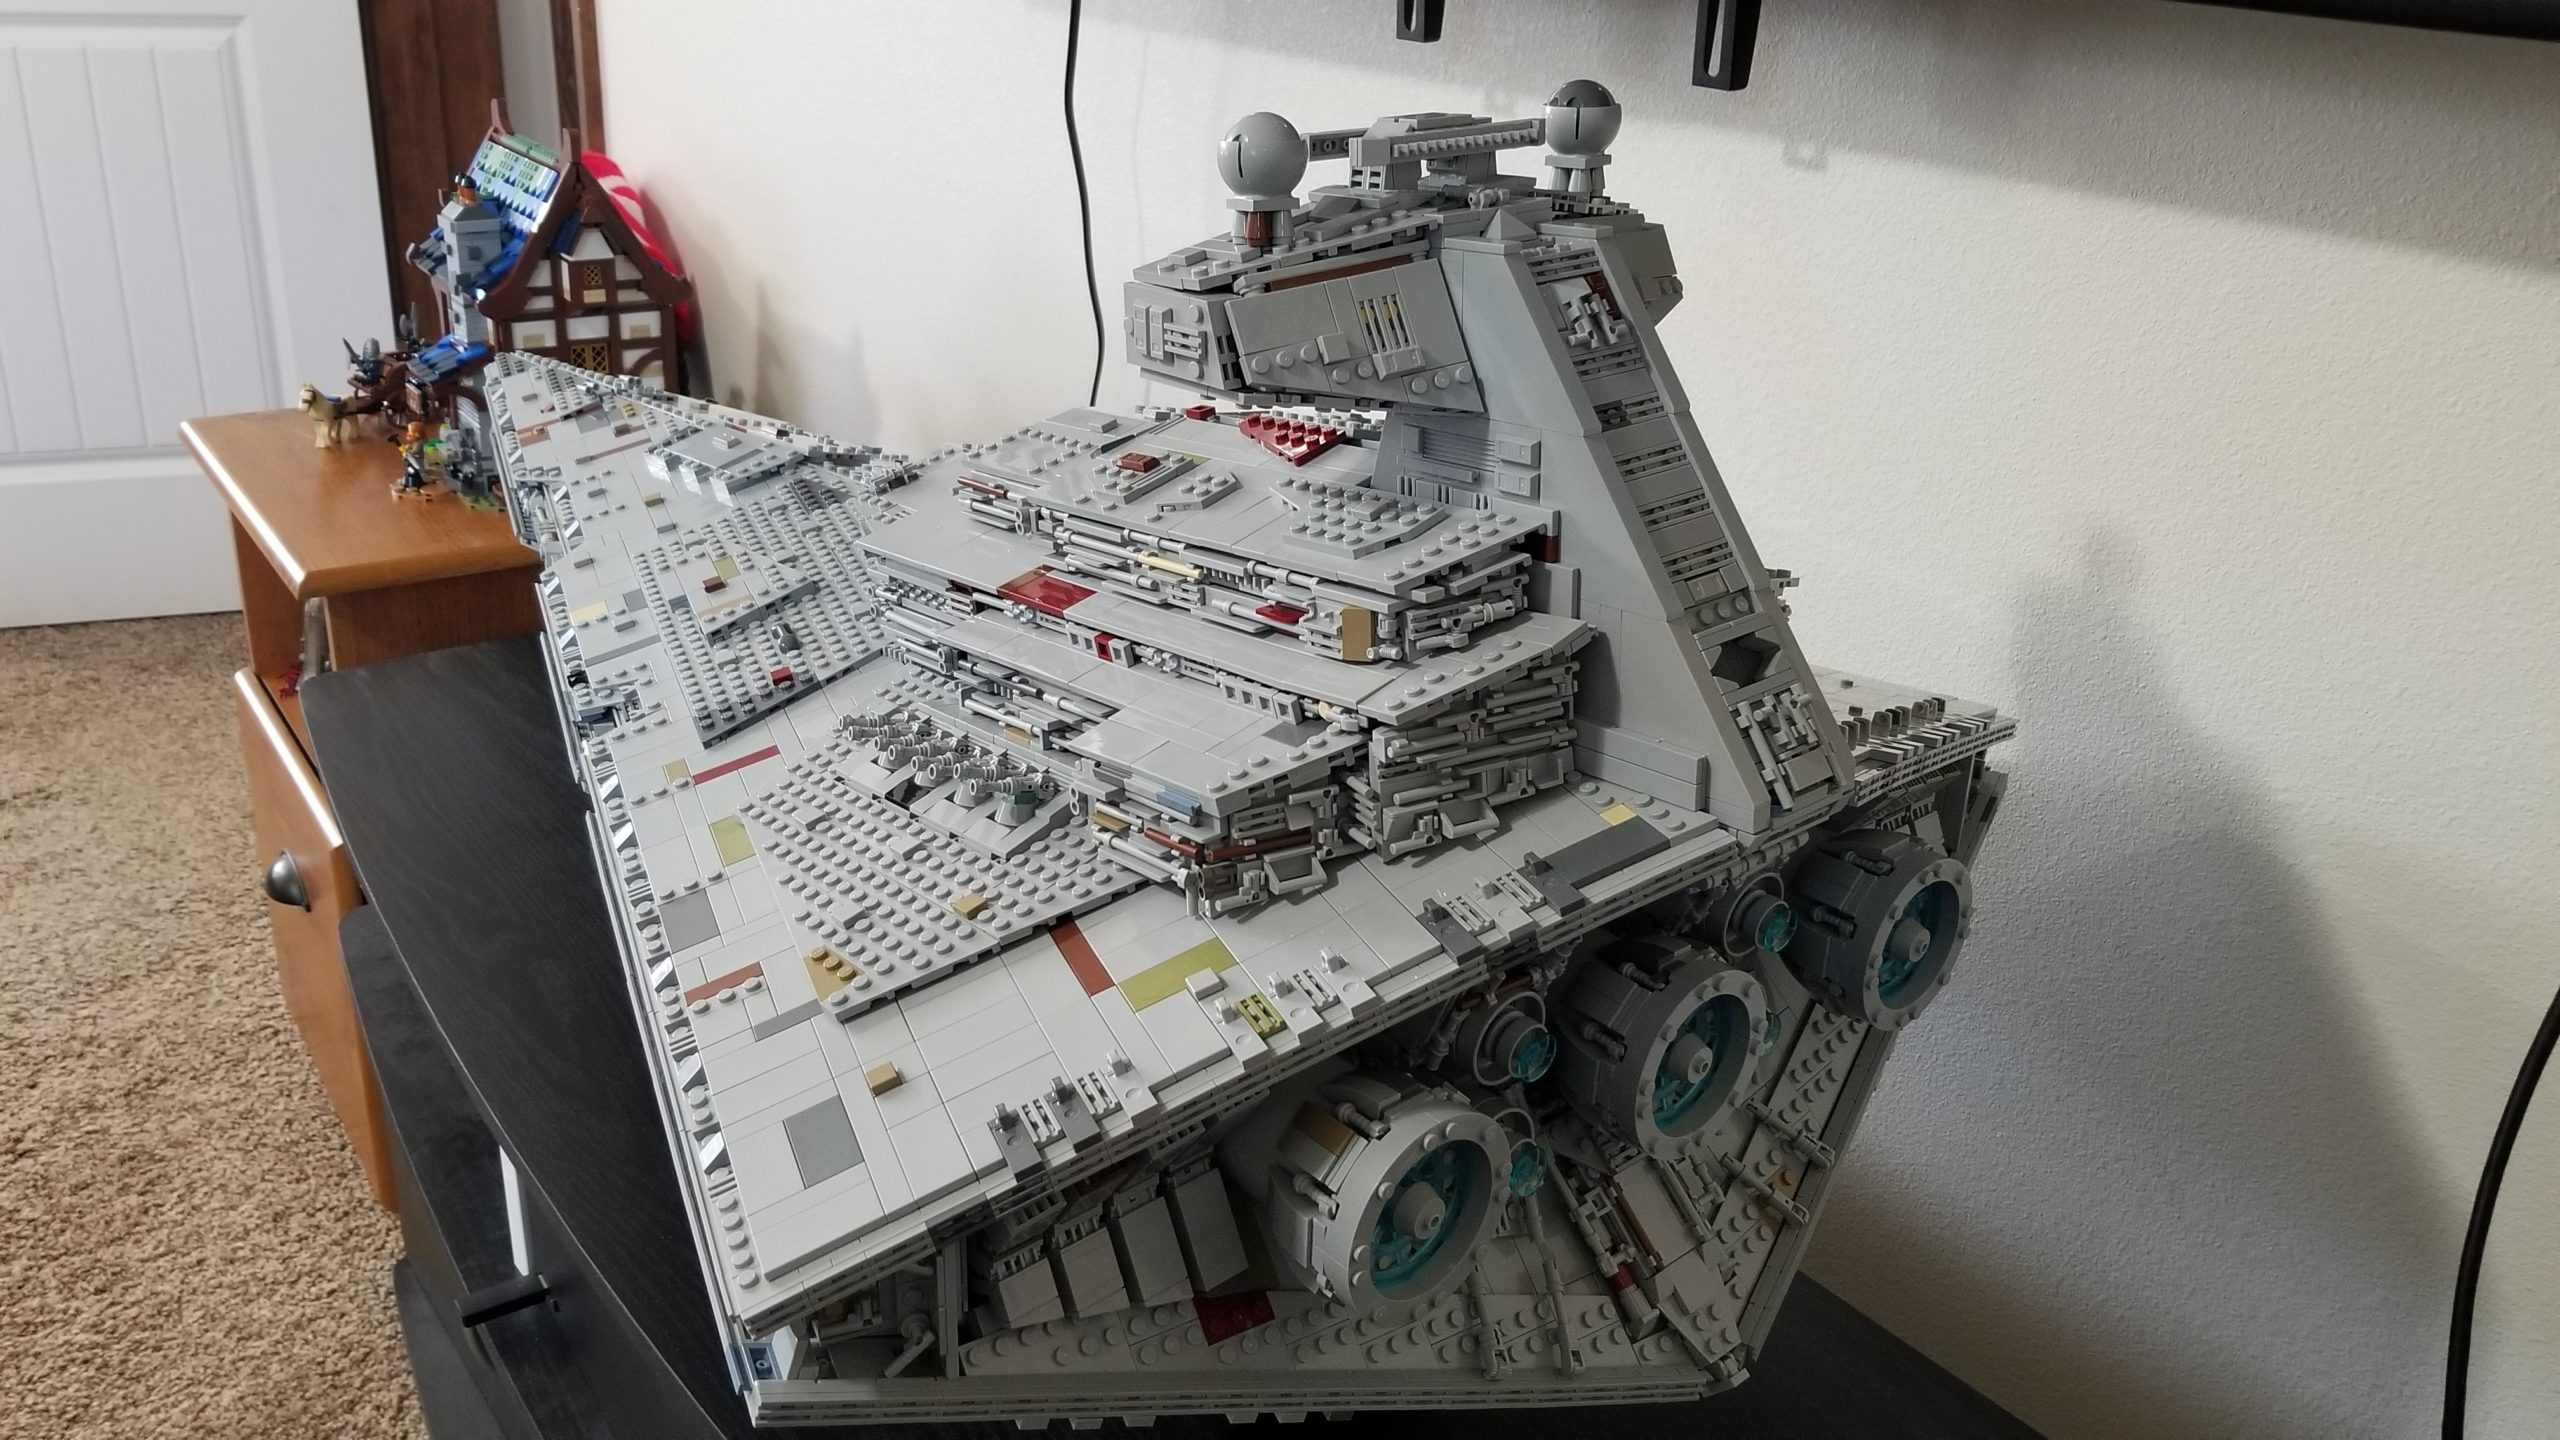 15310 PCS MOC Brick Store, Collect Compatible Building Bricks for MOC-9018 Moderately Sized Star Wars ISD with Full Interior, Building Blocks Toys